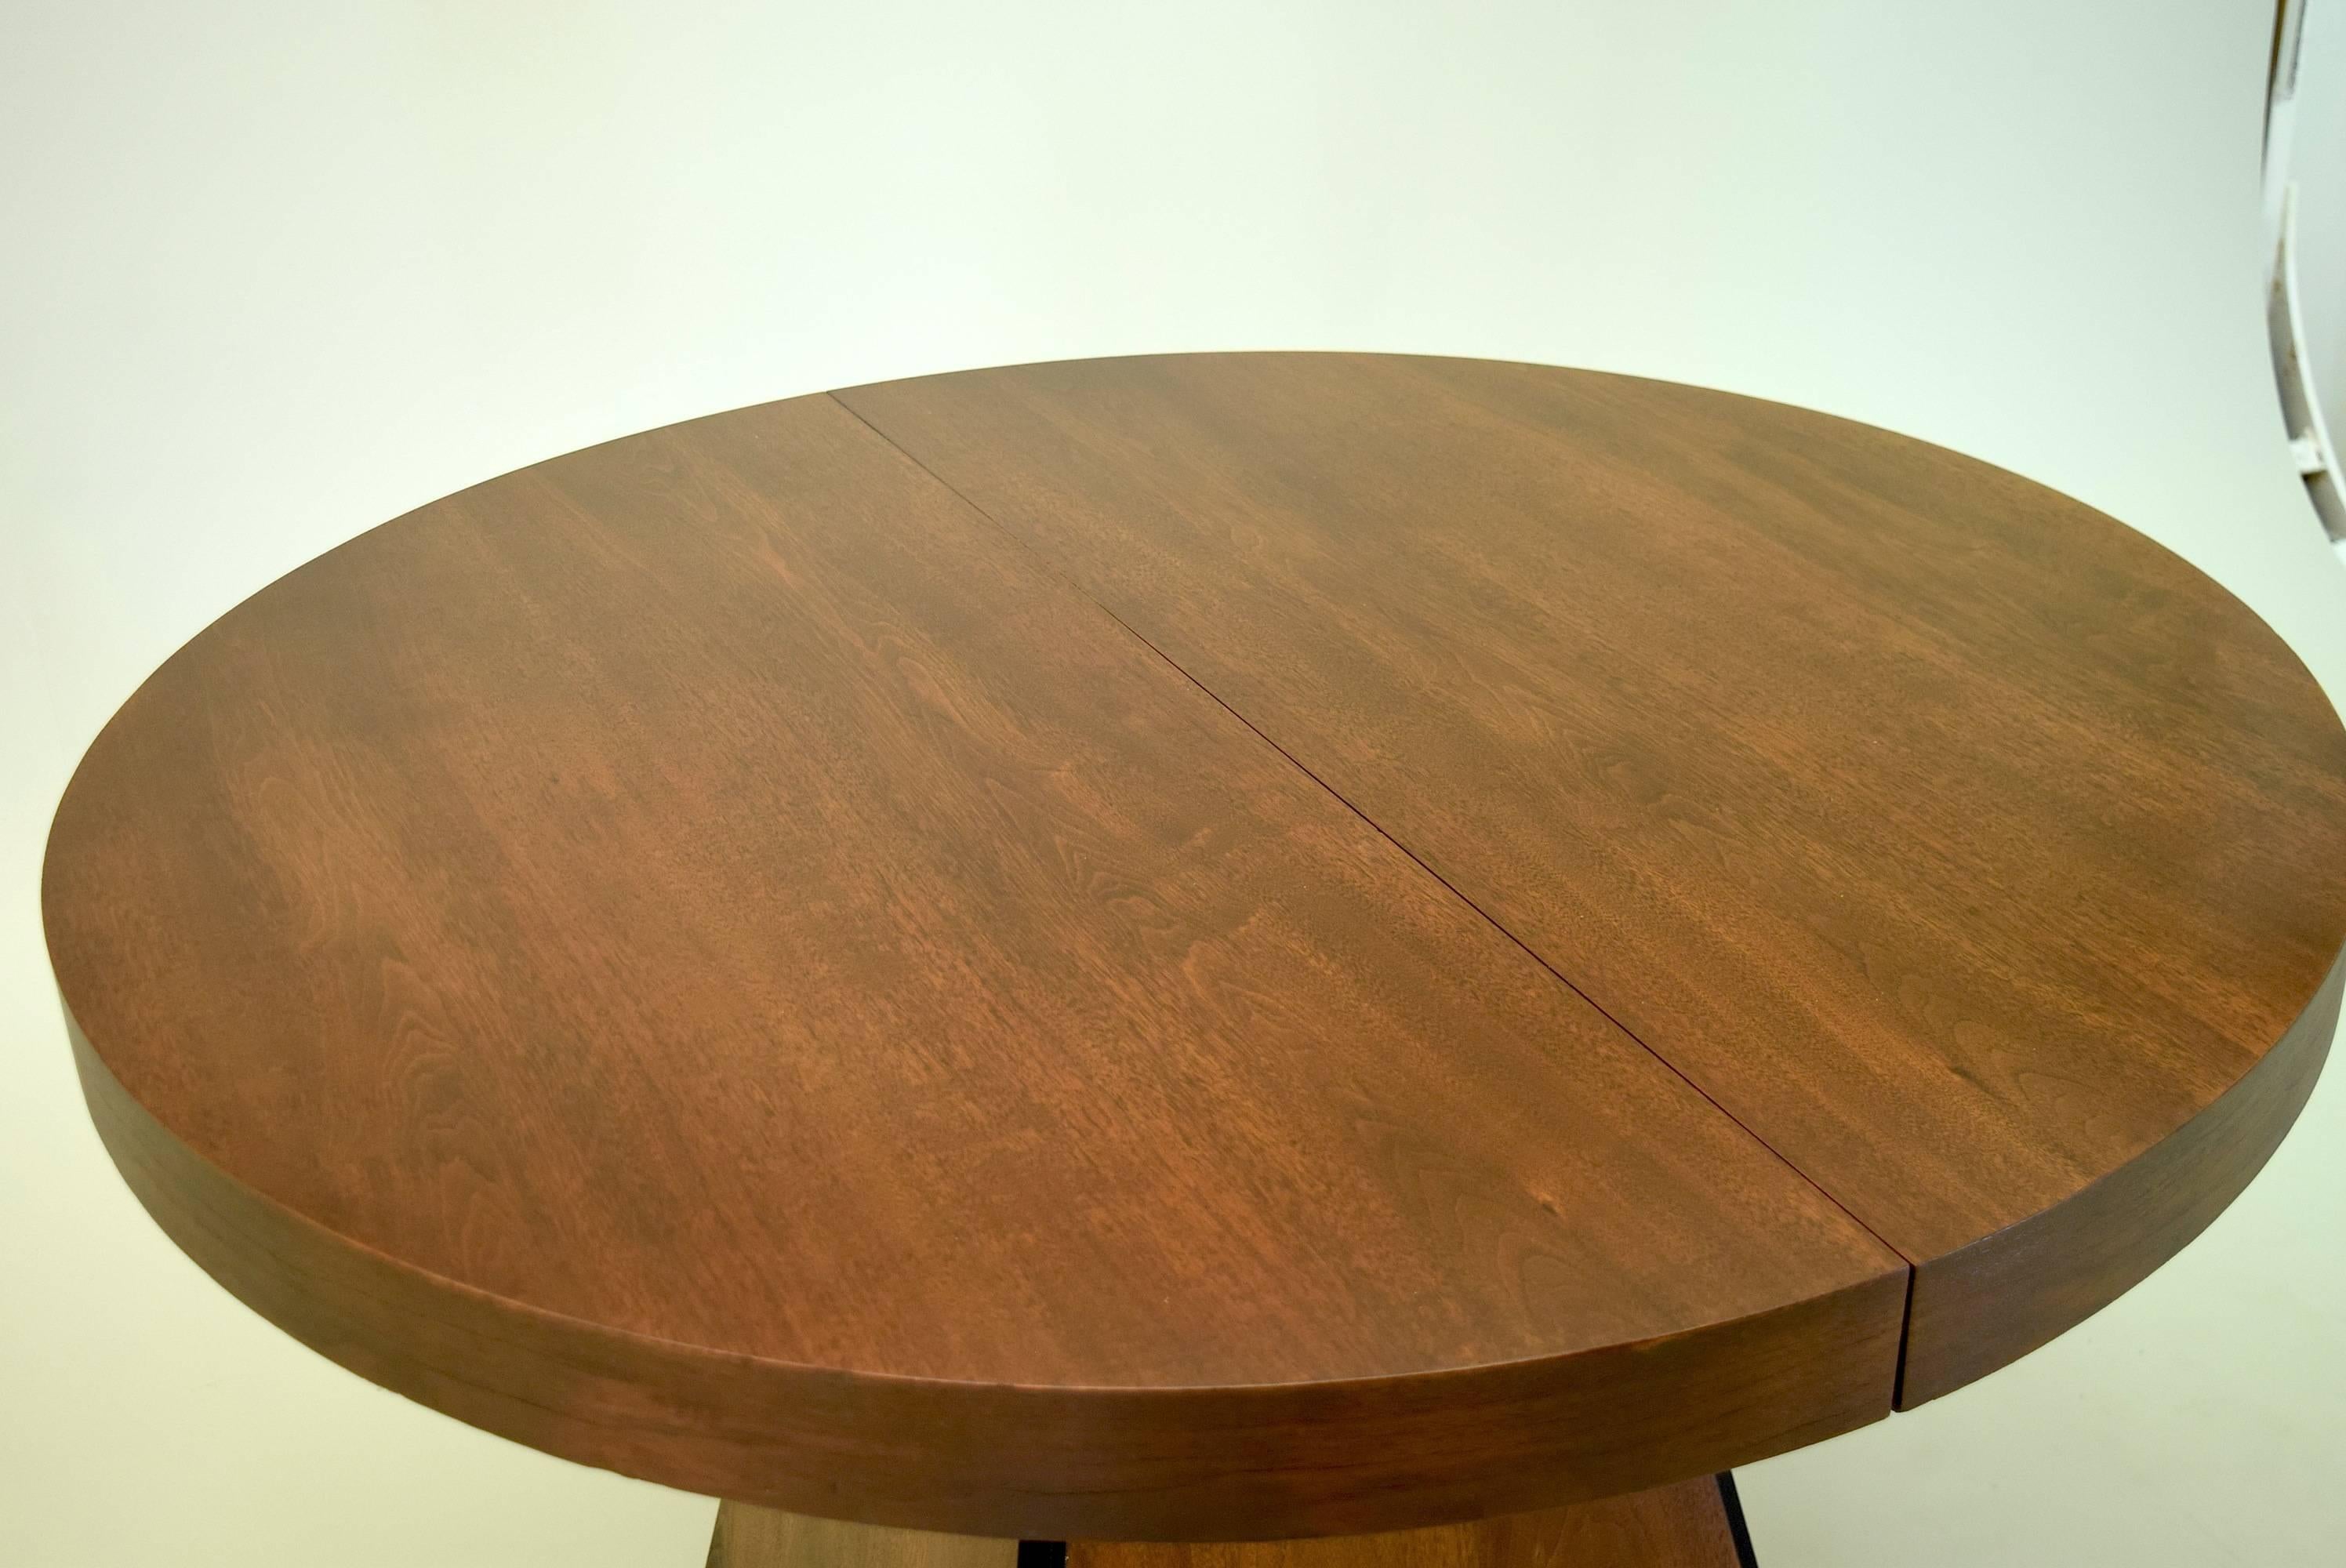 Designed by modern design legend Pierre Cardin and produced by Dillingham Furniture, this striking obelisk base dining table is one of the few known examples produced entirely in walnut. 

The table seats four, and with the extension leaf in use